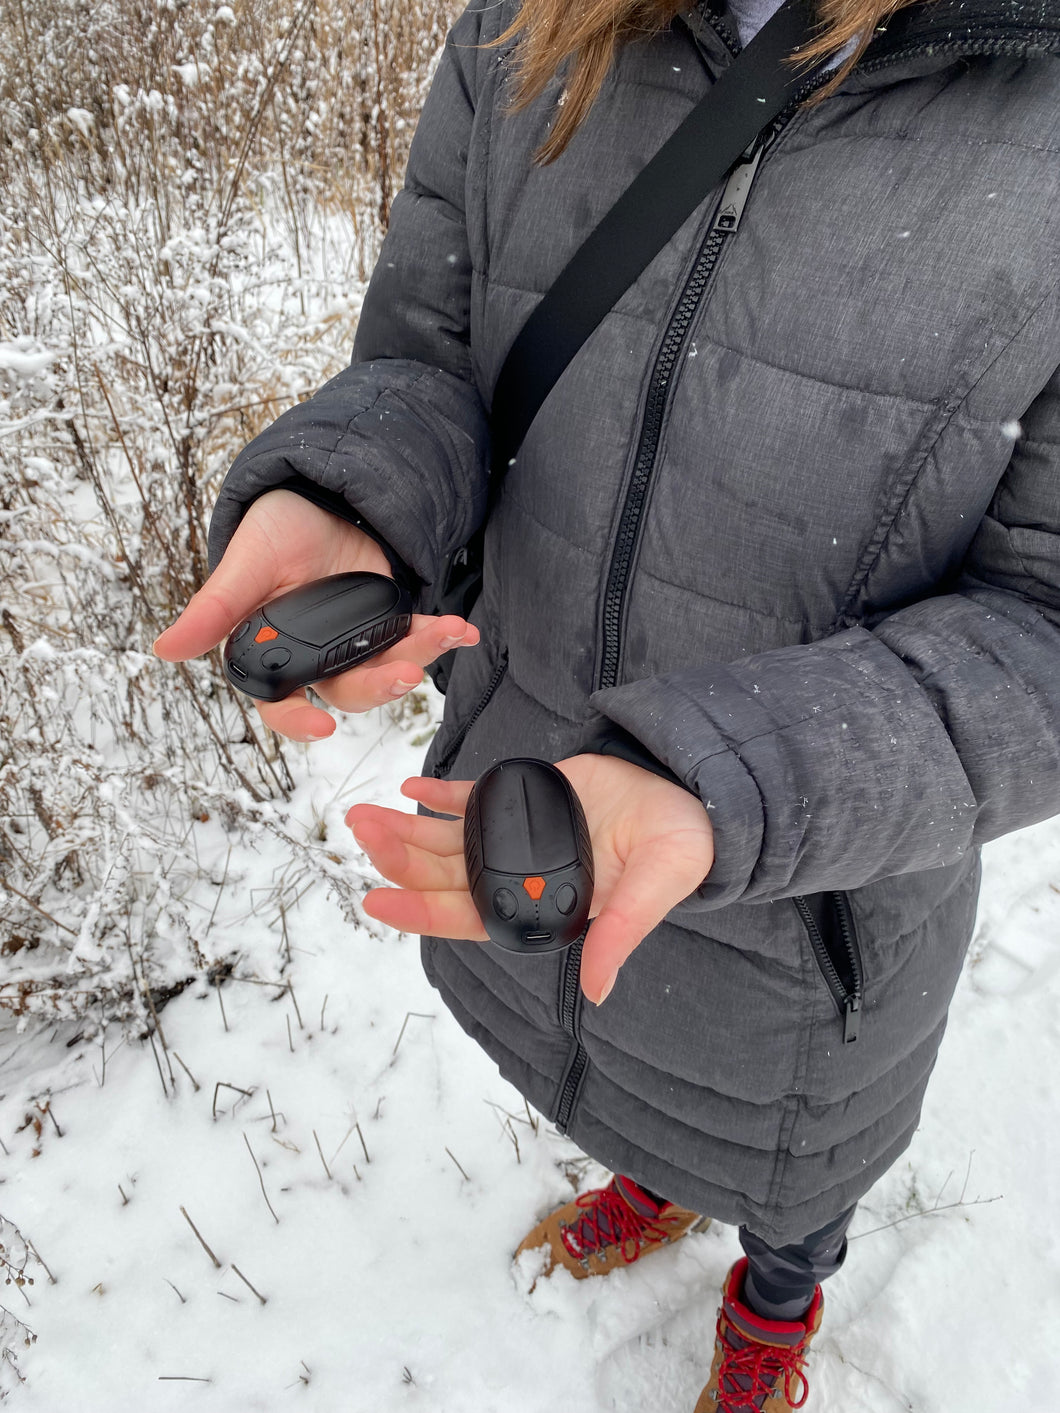 A person is holding two round, black devices with an orange button in the middle of each. One is in each hand. There is snow all around.